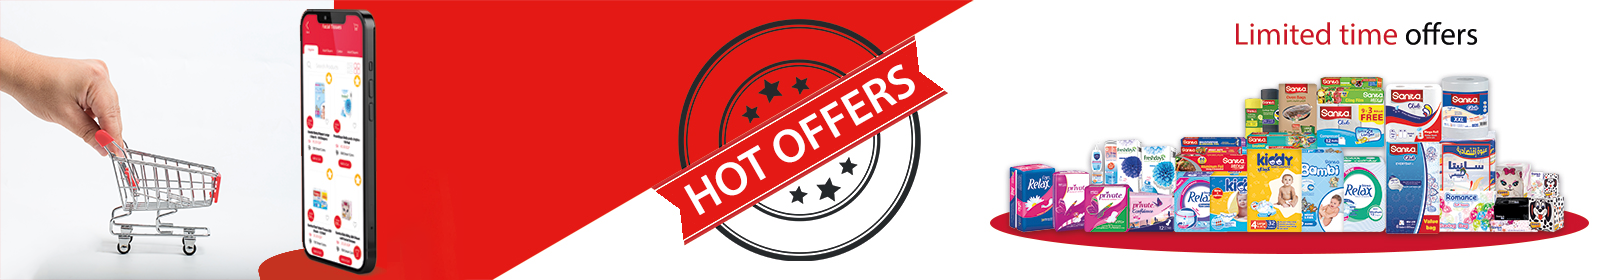 Hot Offers Store